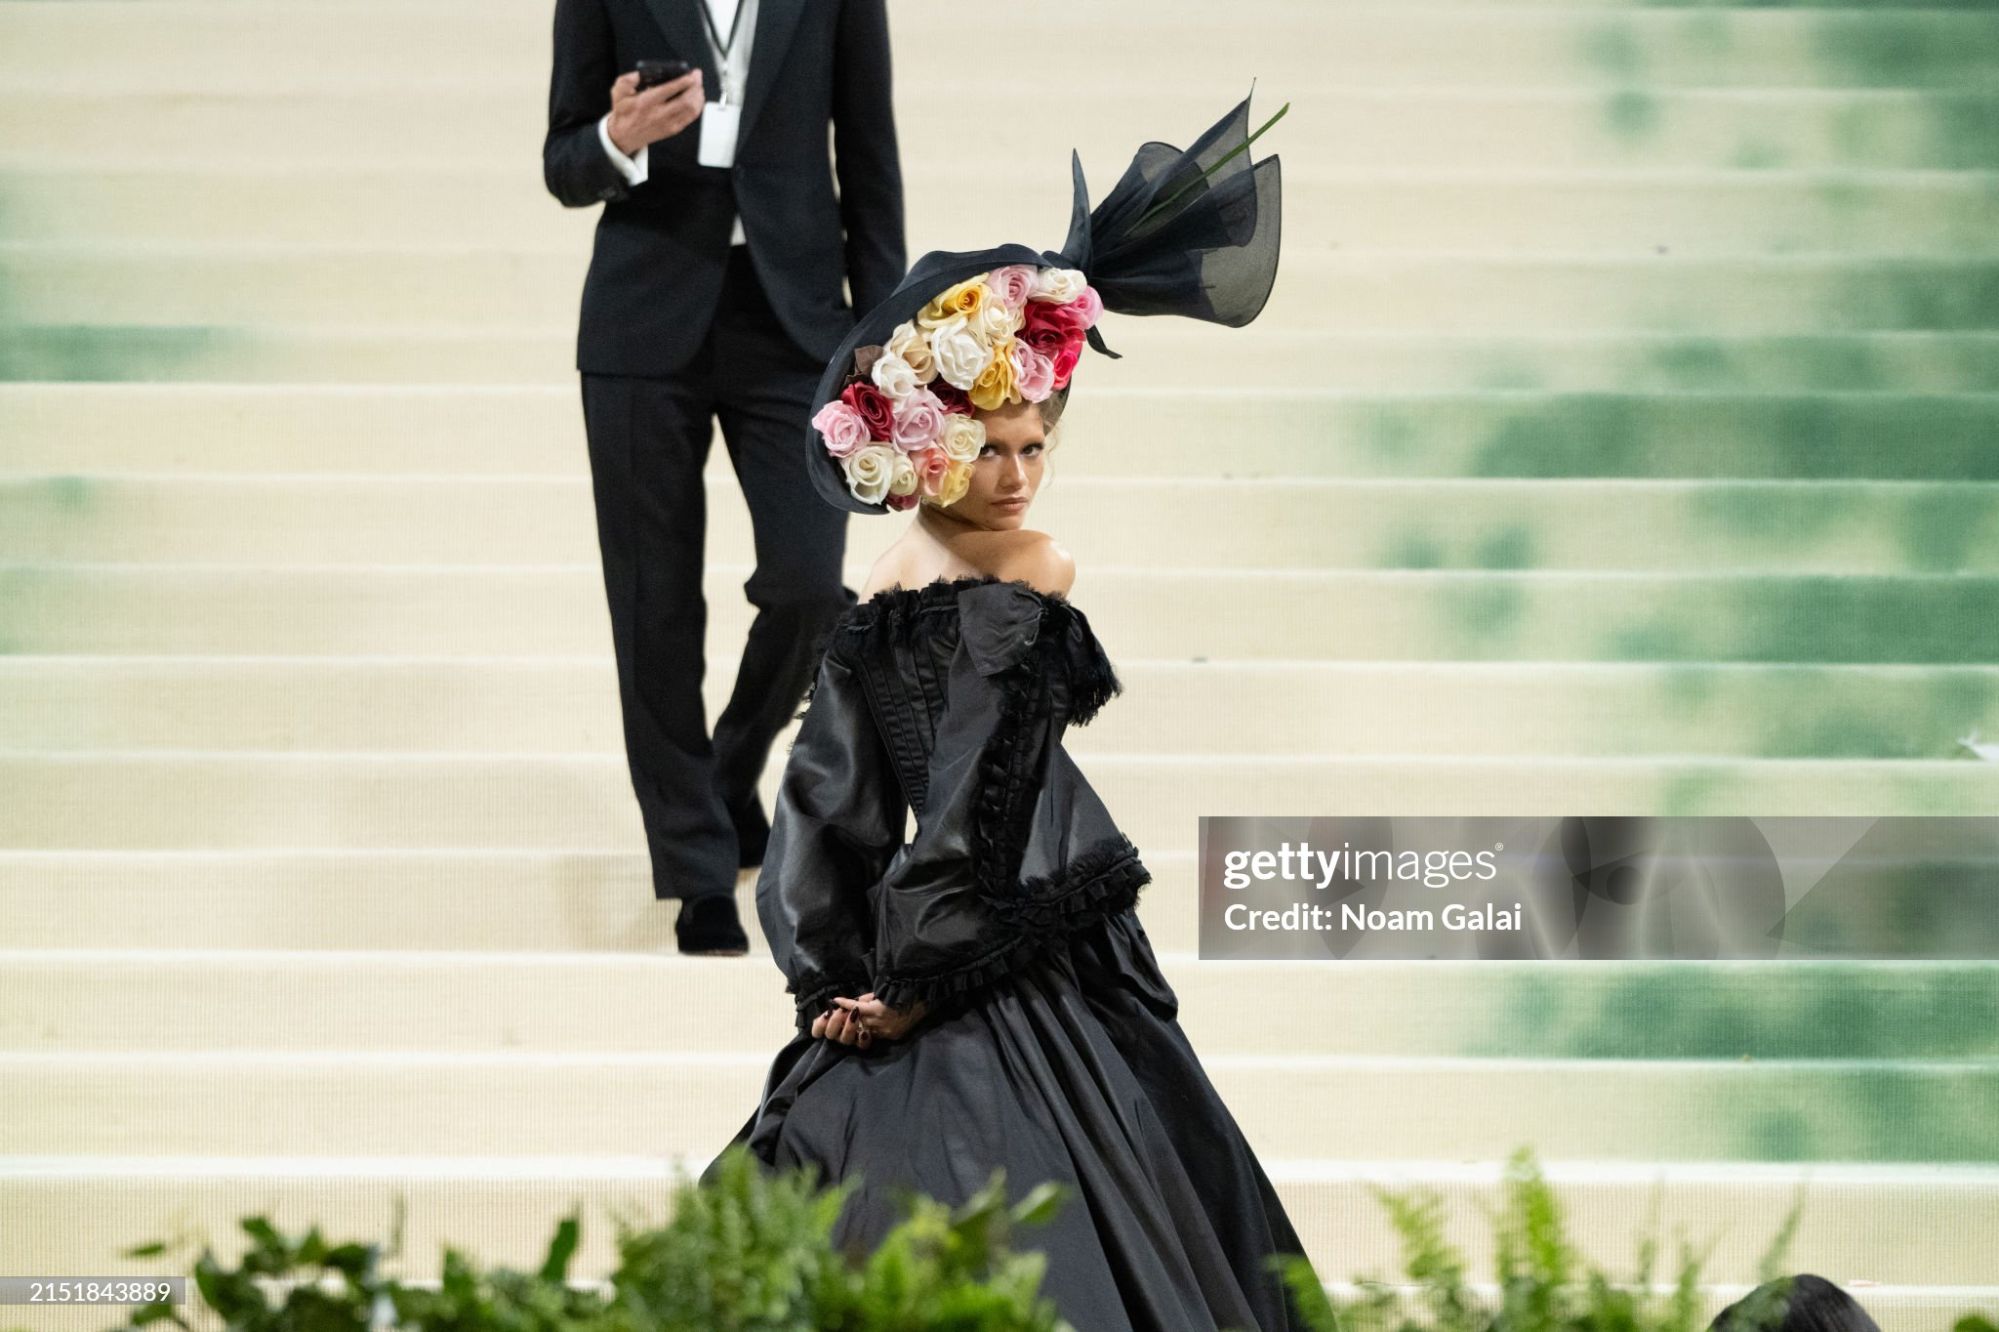 gettyimages-2151843889-2048x2048.jpg